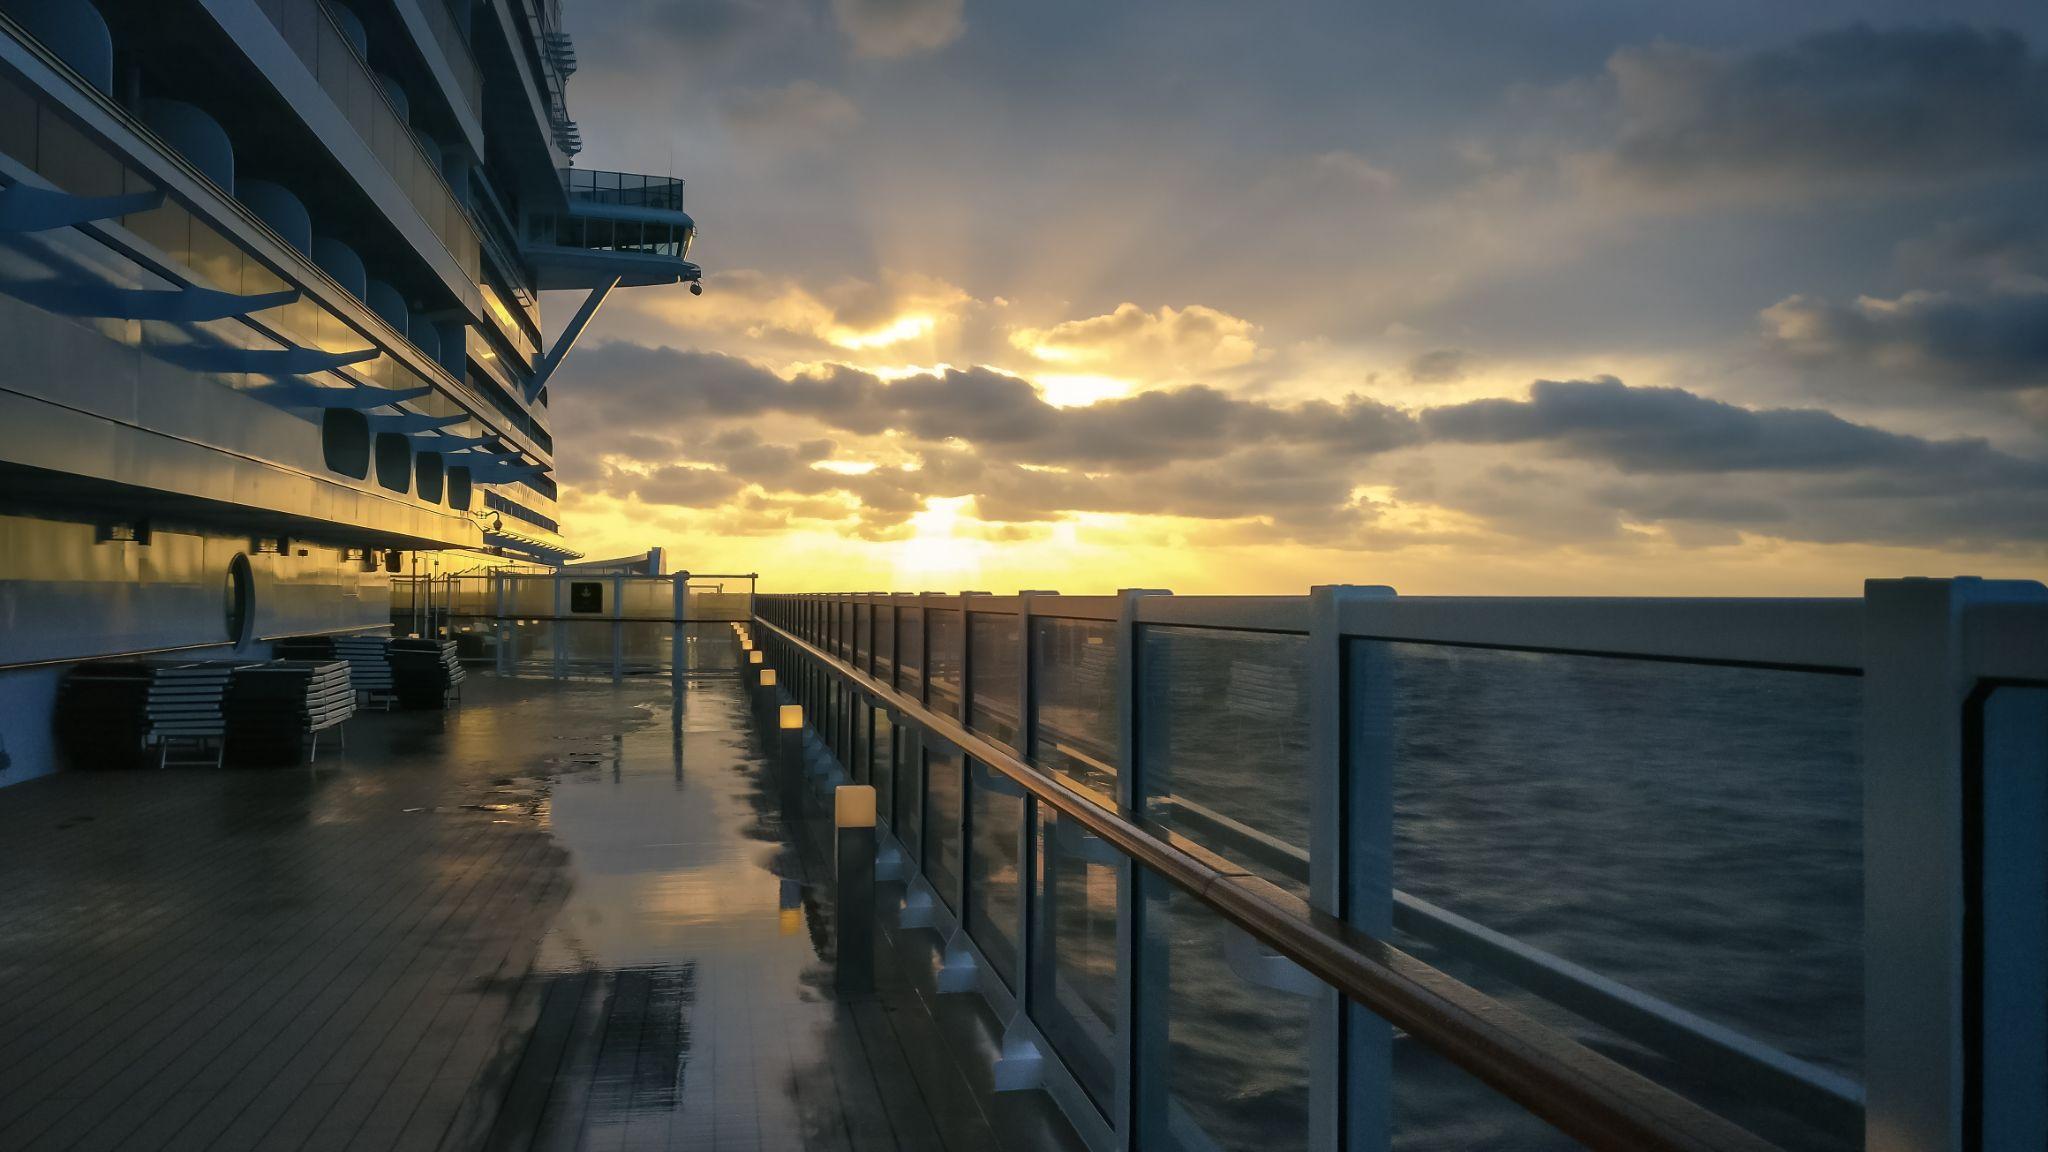 Sunrise from the deck of a cruise ship